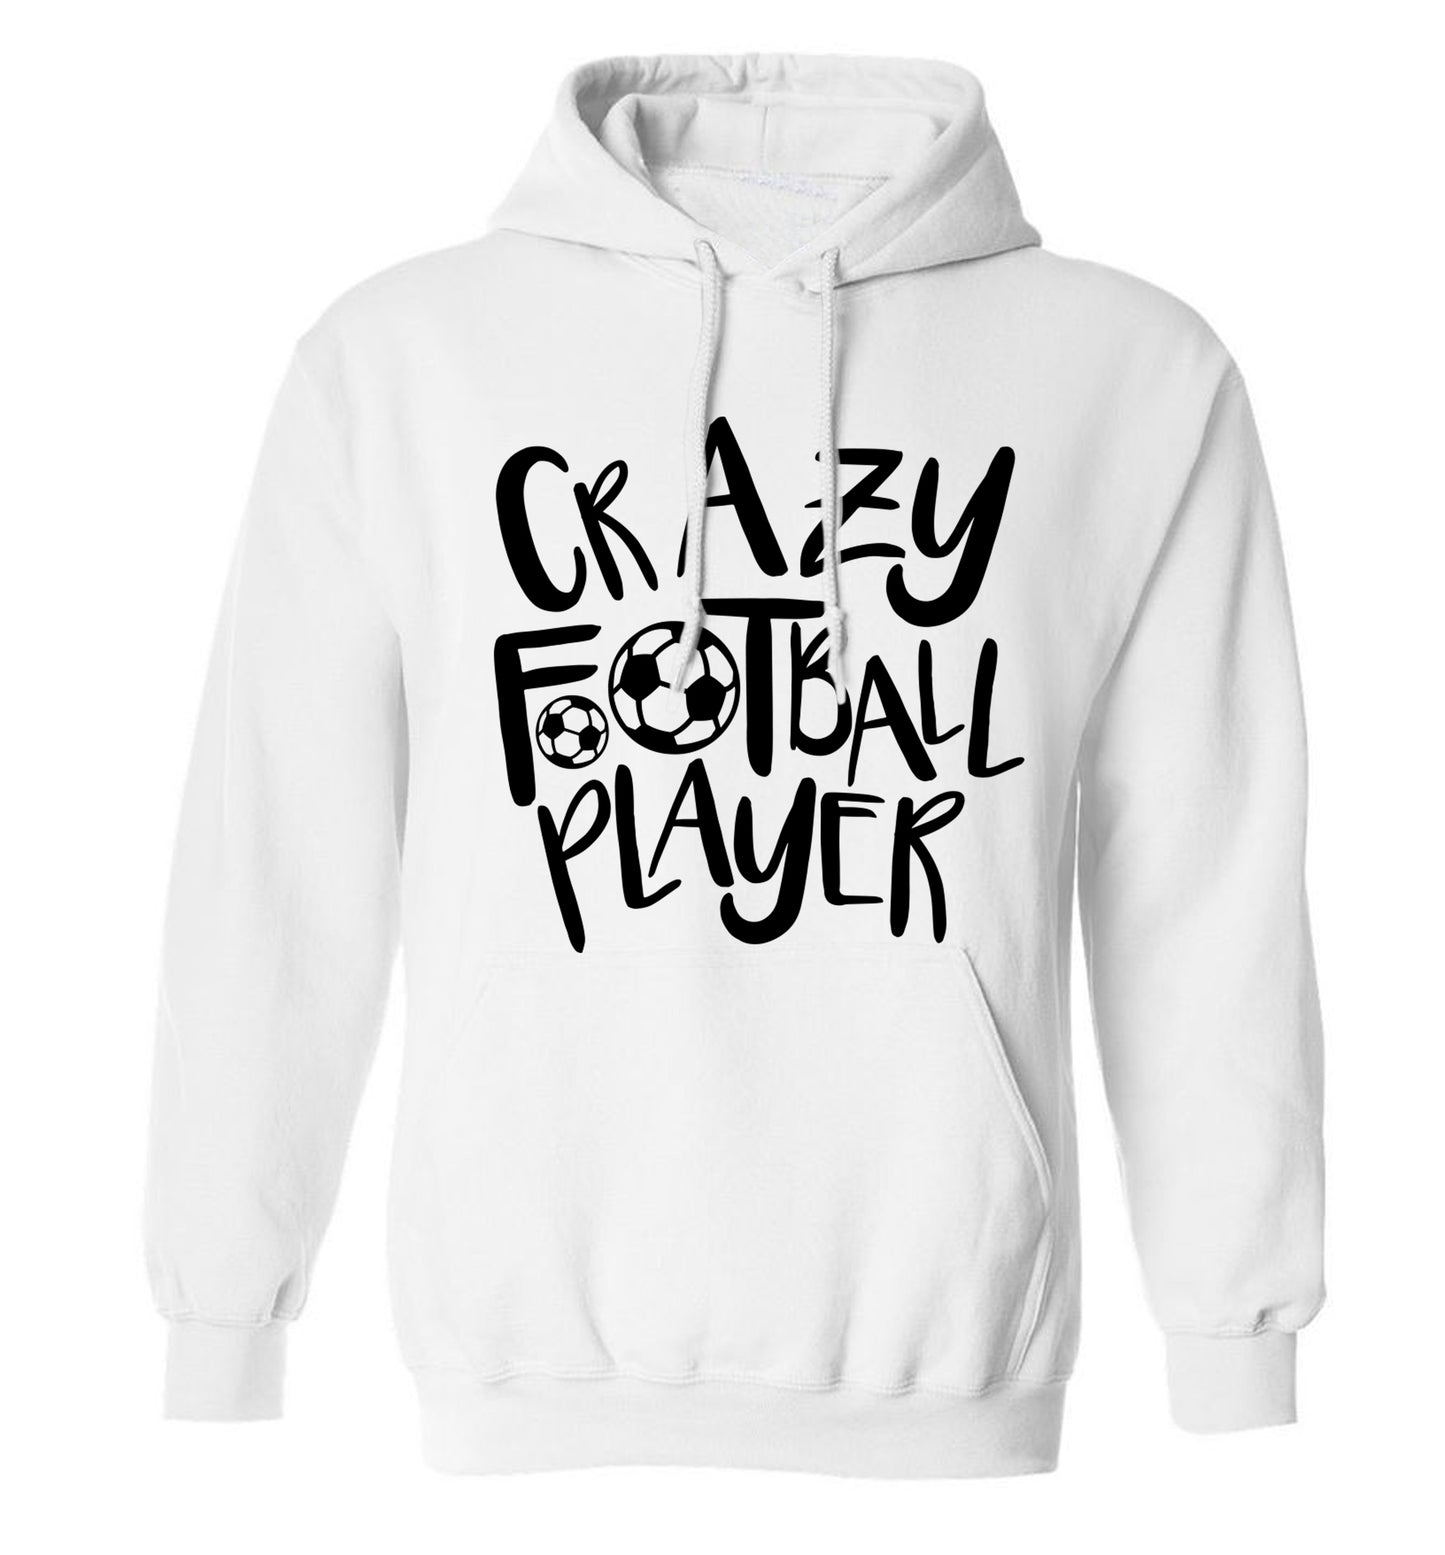 Crazy football player adults unisexwhite hoodie 2XL